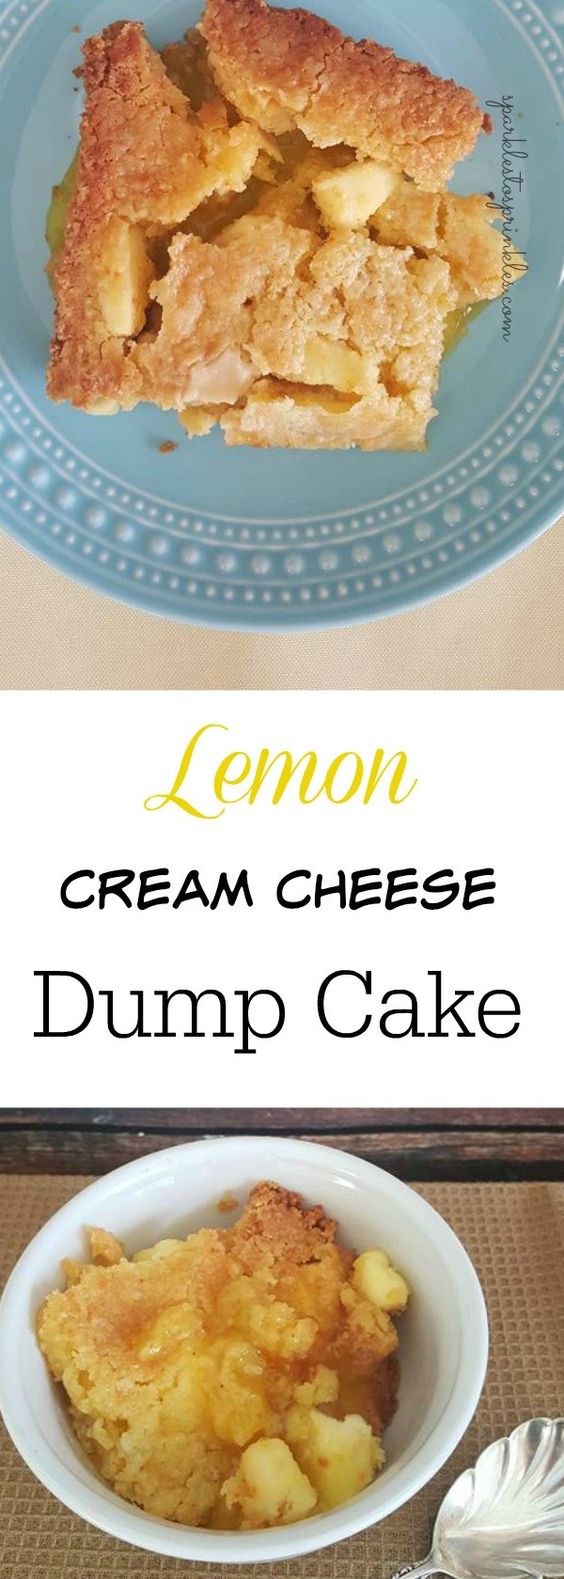 Pinned over 125,000 times!! This is one of the best dump cake recipes there is! A lemon lovers delight!